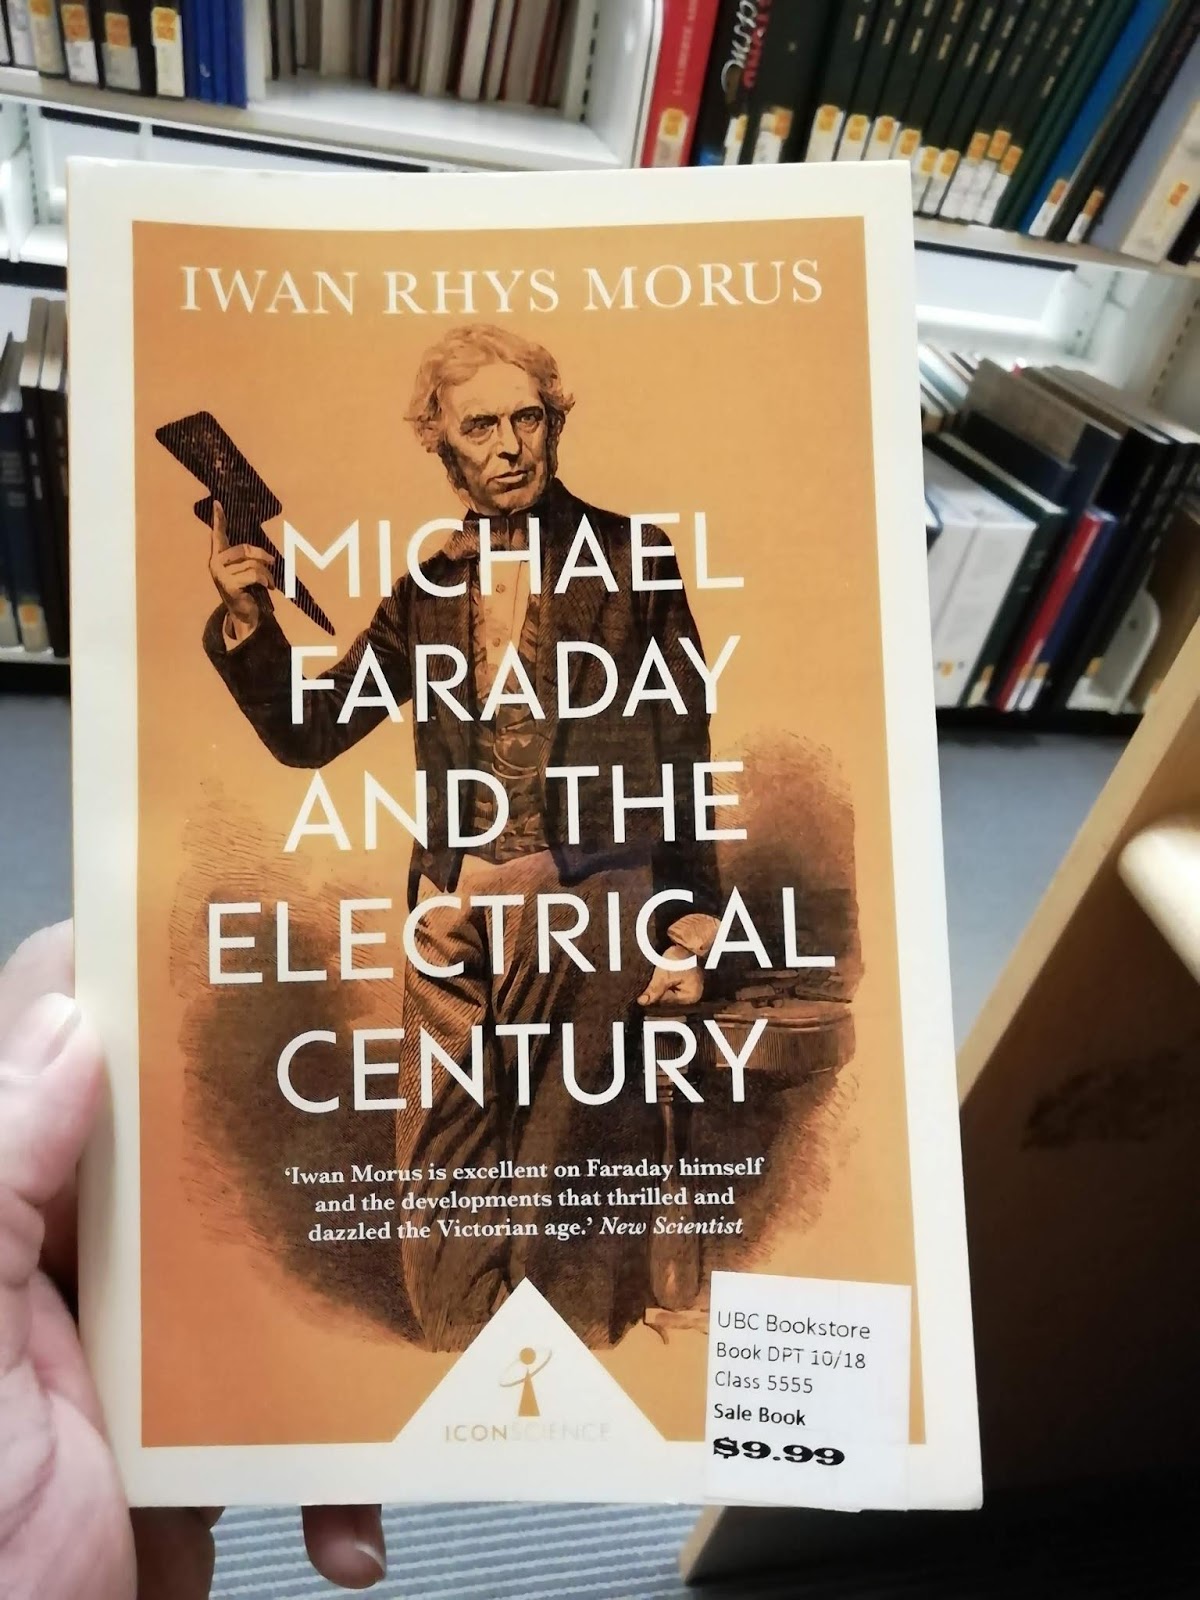 Book Post 11: Michael Faraday and the Electrical Century by Iwan Rhys Morus